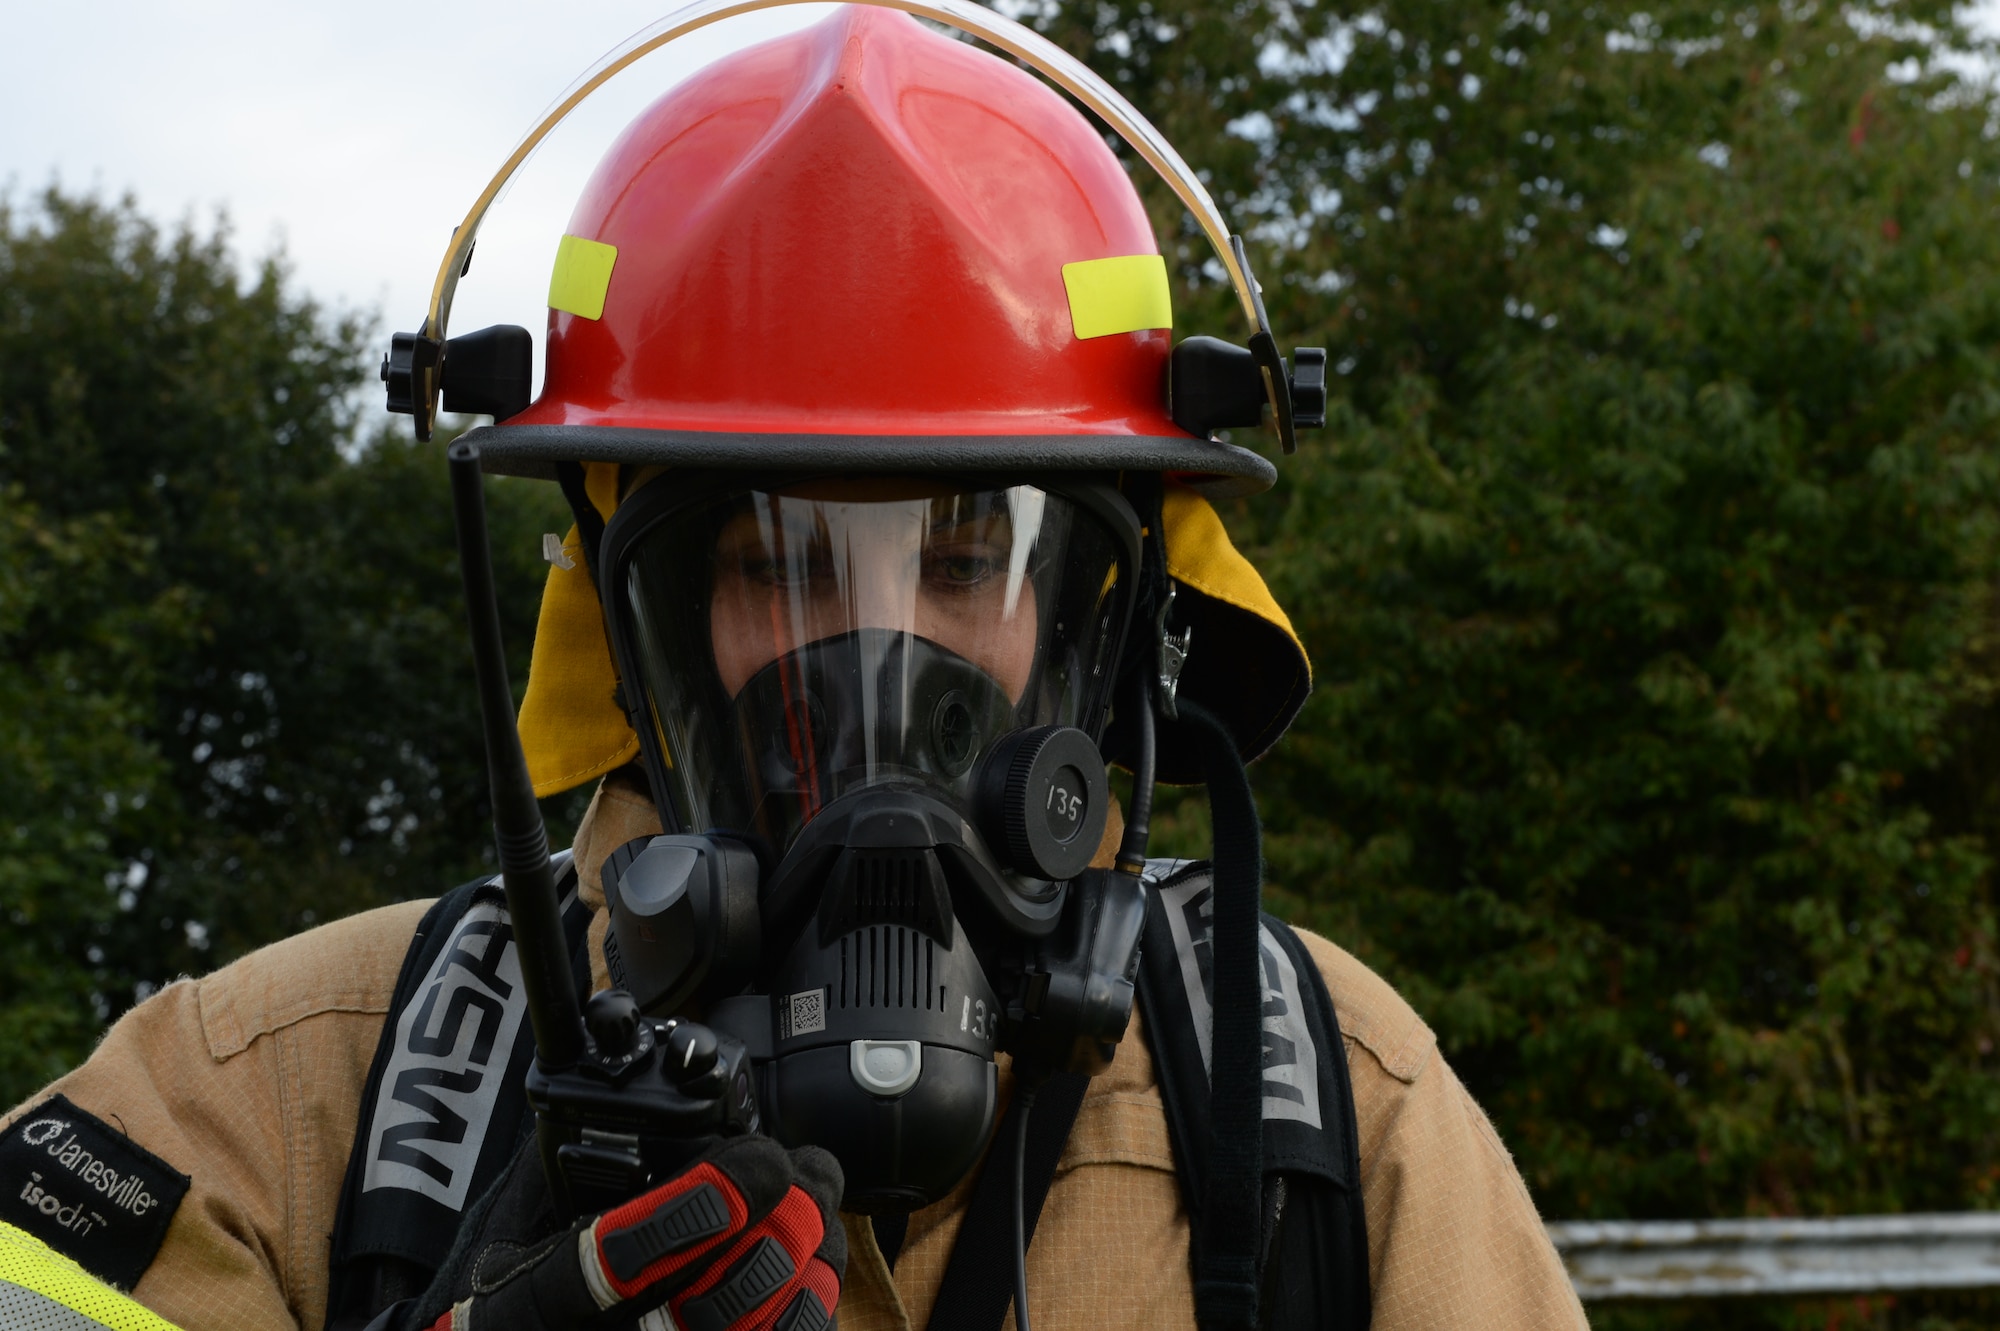 U.S. Air Force Staff Sgt. Jessica Morgan, a 52nd Civil Engineer Squadron firefighter from Chicago, communicates through a radio during a fuel spill exercise Sept. 12, 2014, at Spangdahlem Air Base, Germany. The exercise tested the skills of the base’s responders to ensure a quick response to a fuel spill. (U.S. Air Force photo by Airman 1st Class Dylan Nuckolls/Released)